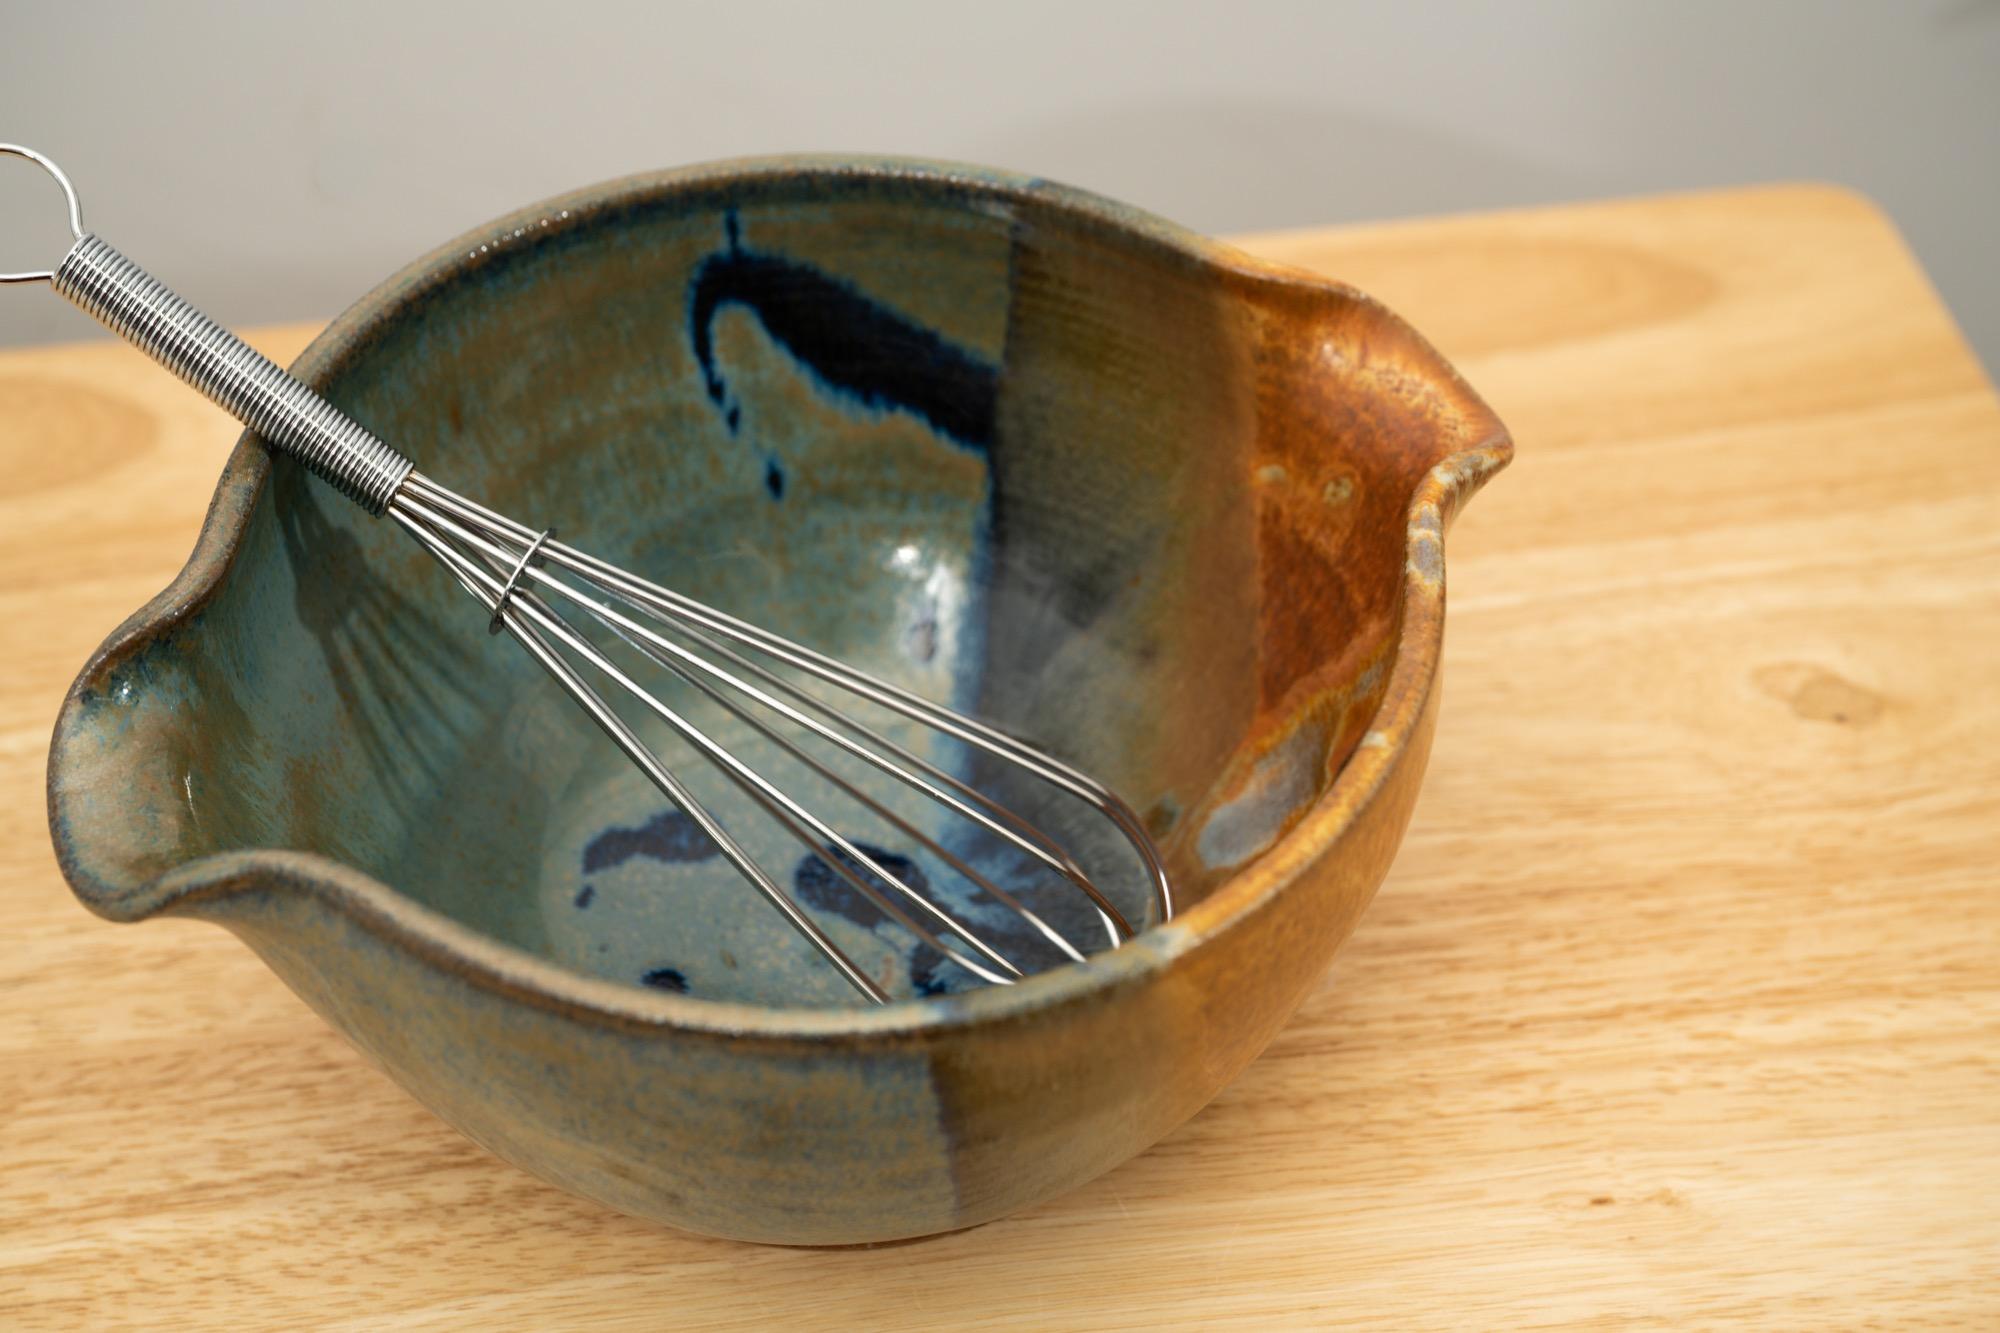 Clay Coyote Mixing Bowl with tiny wire whisk for whipping batter